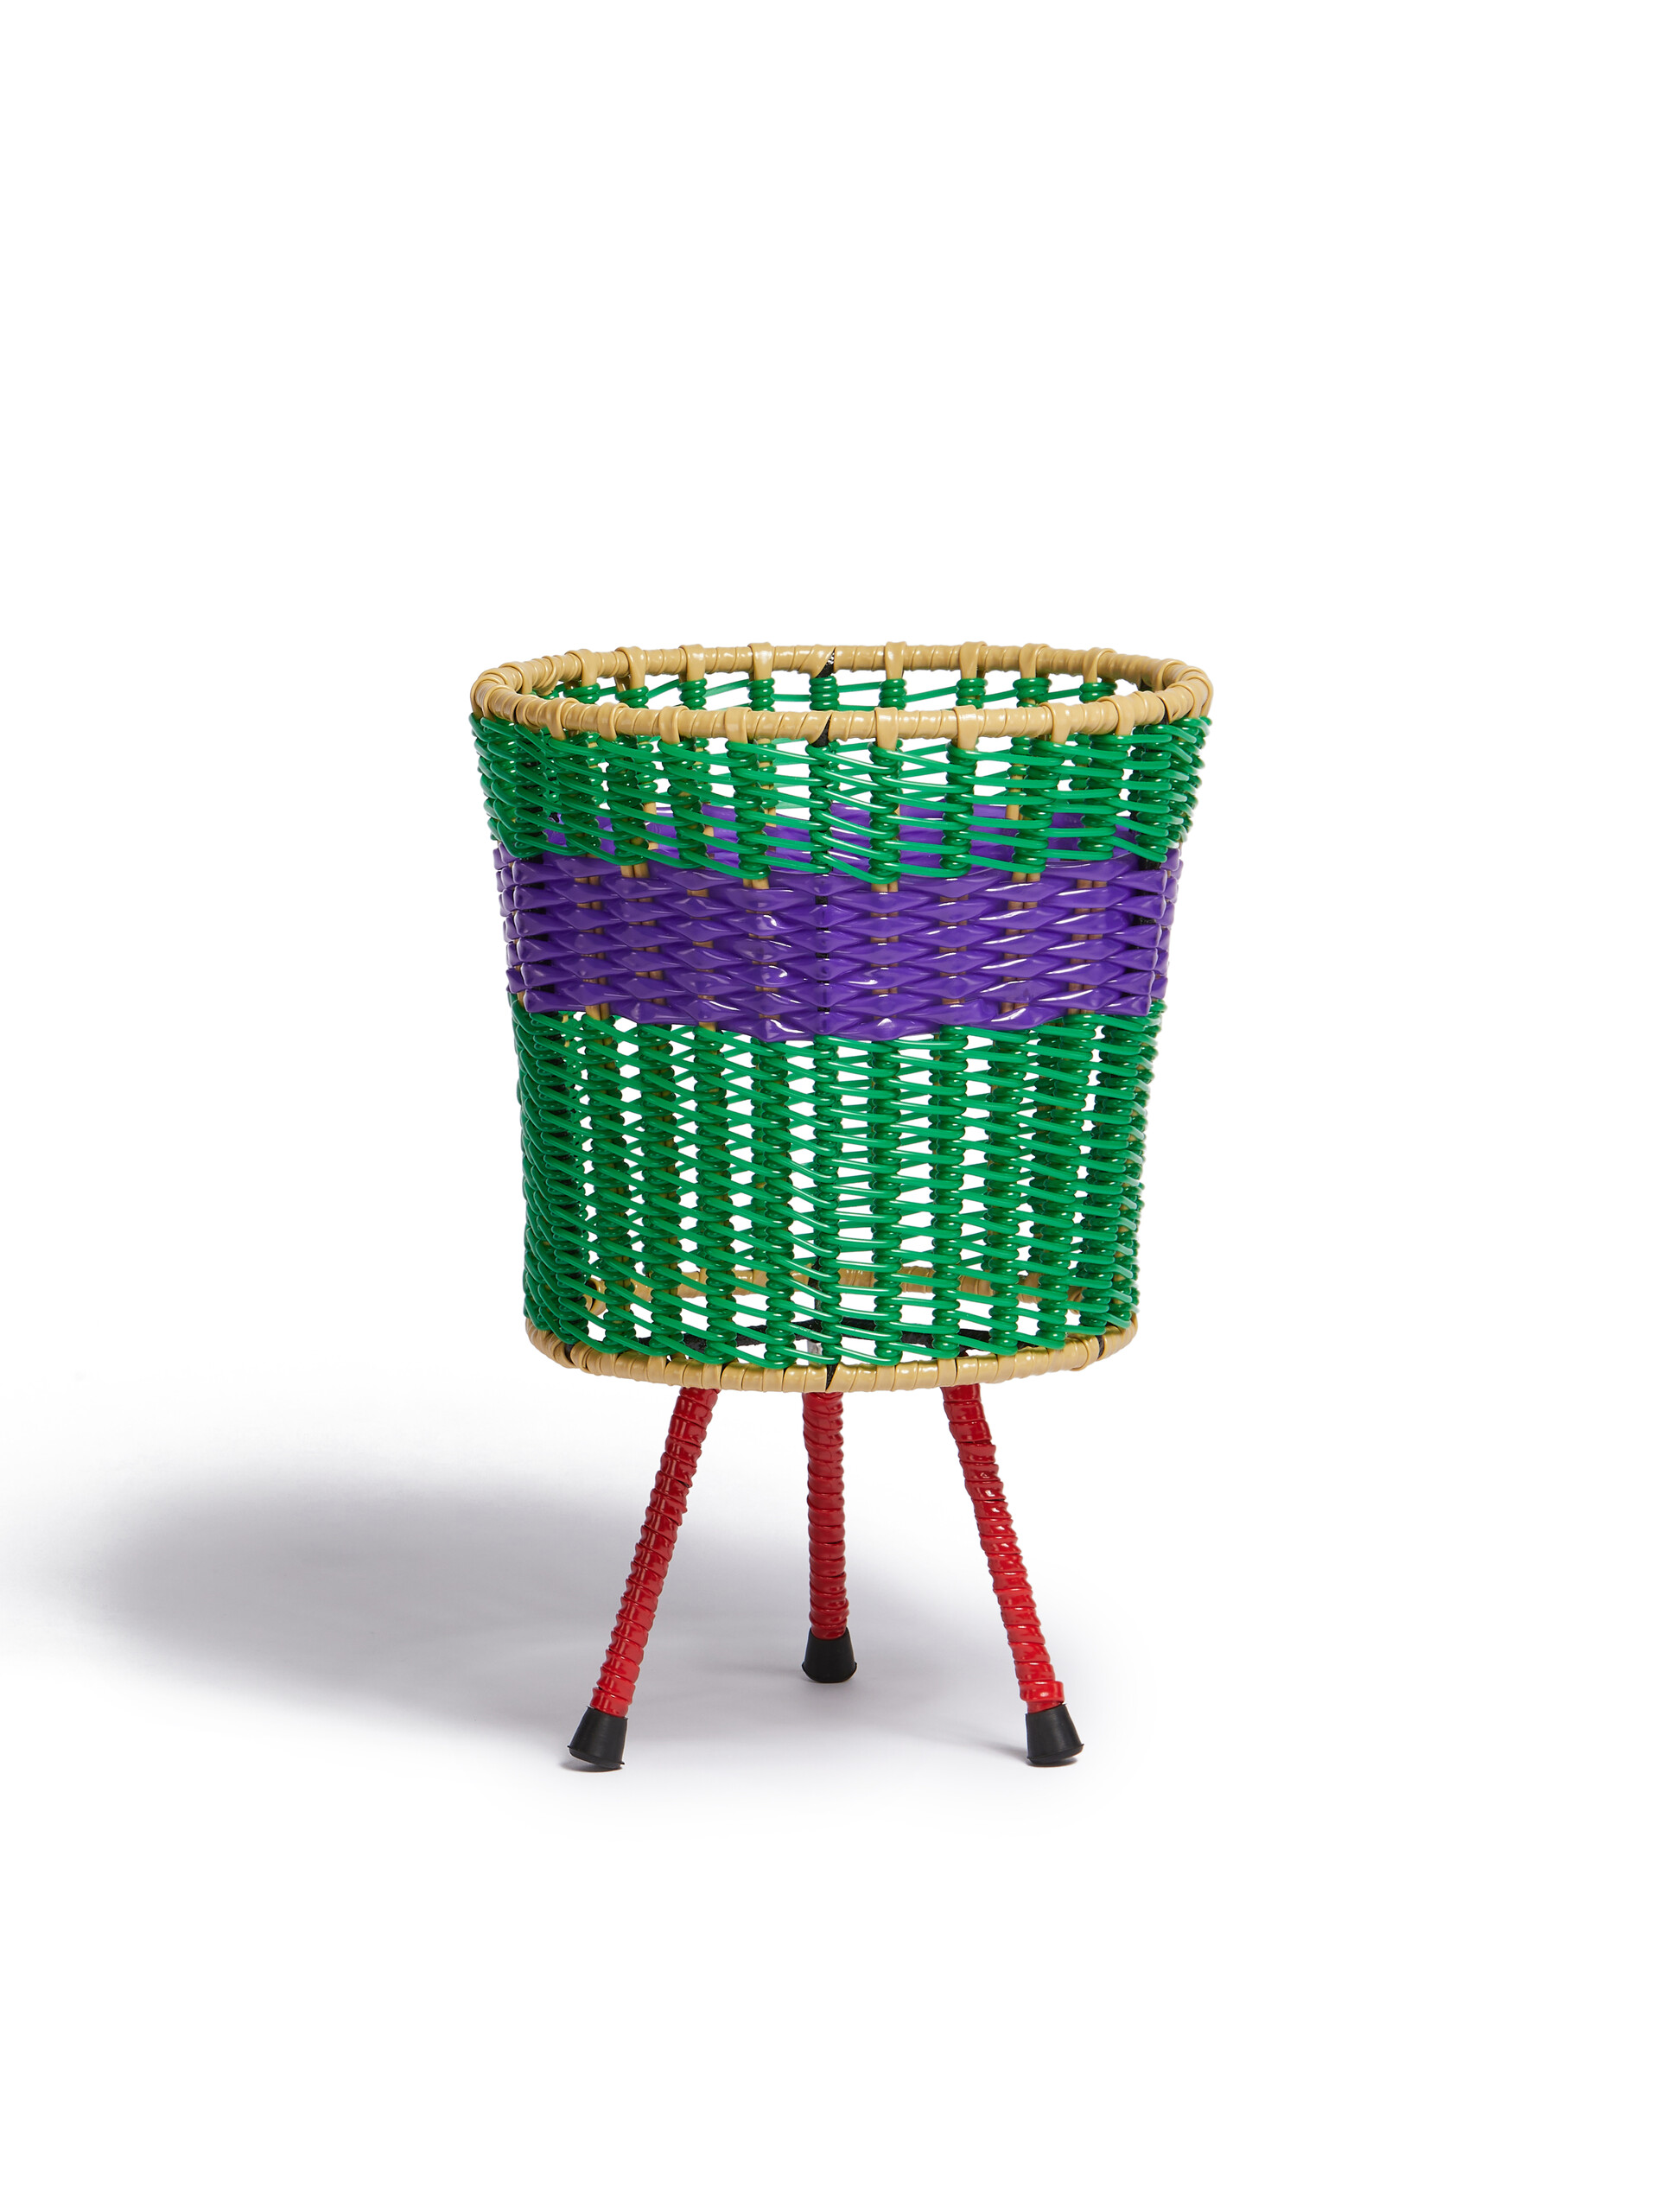 Green MARNI MARKET woven cable plant stand - Accessories - Image 2